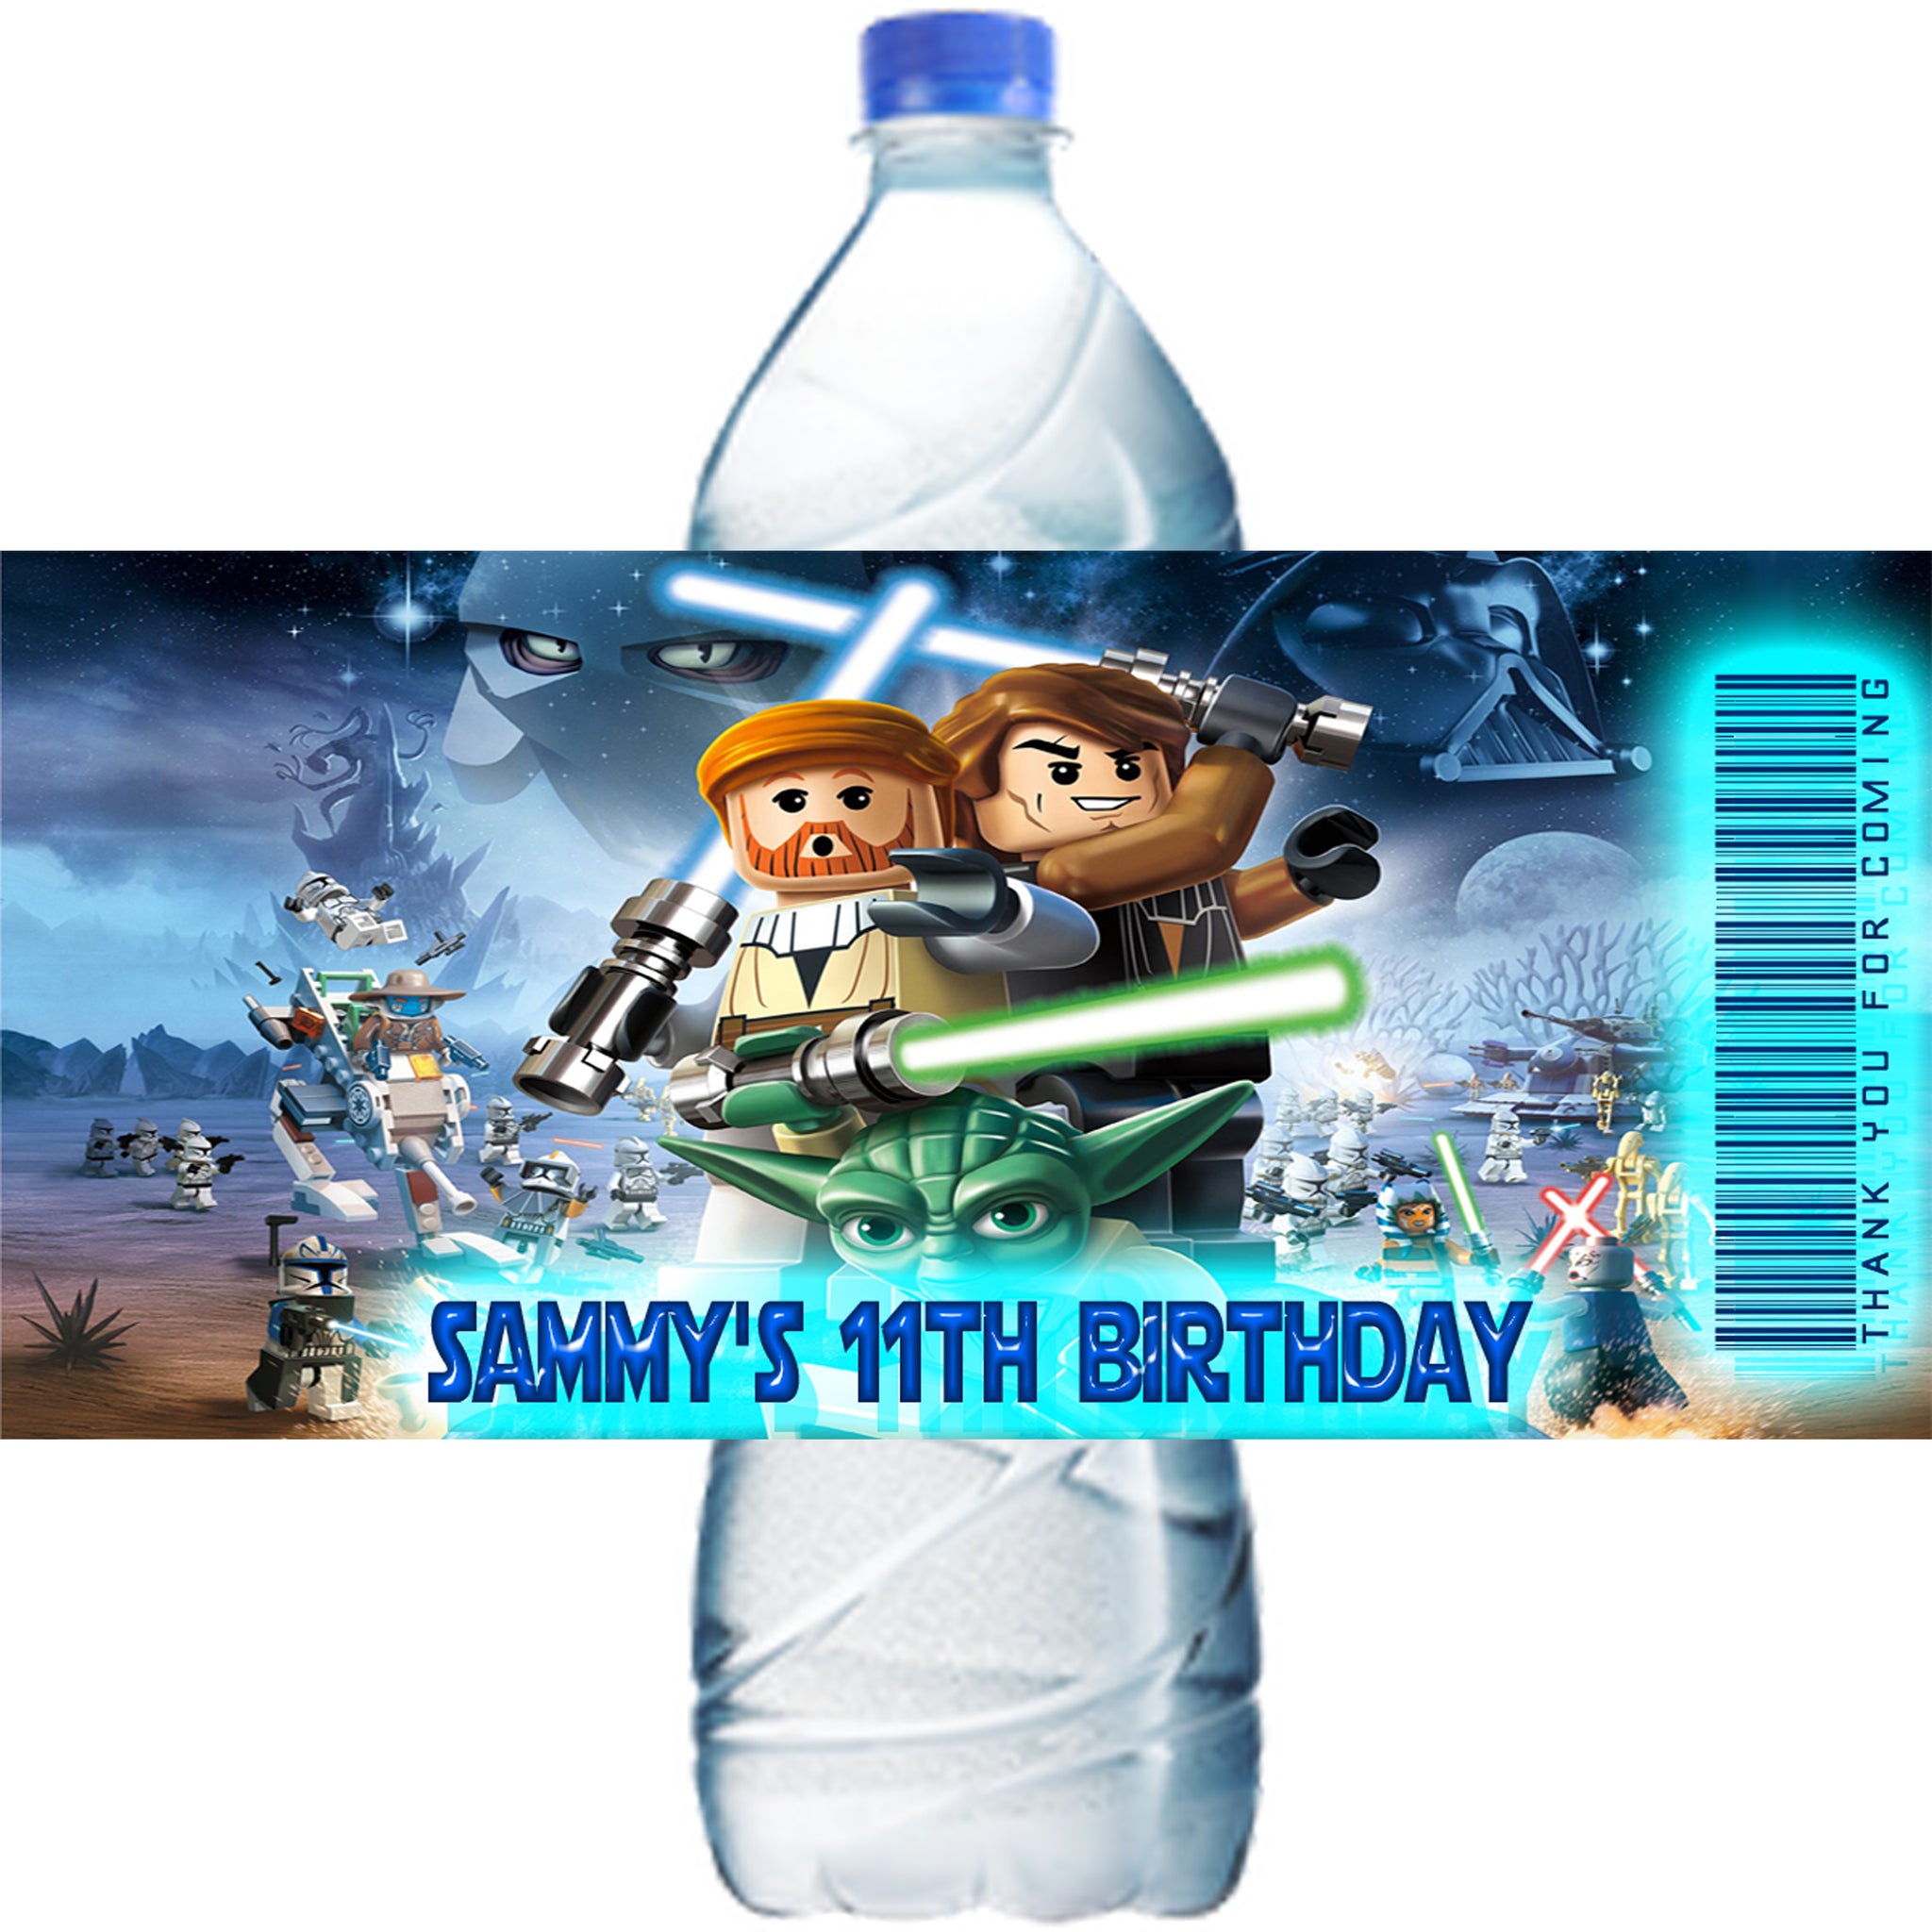 (10) Personalized LEGO STAR WARS Glossy Water Bottle Labels, Party Favors, 2 Sizes